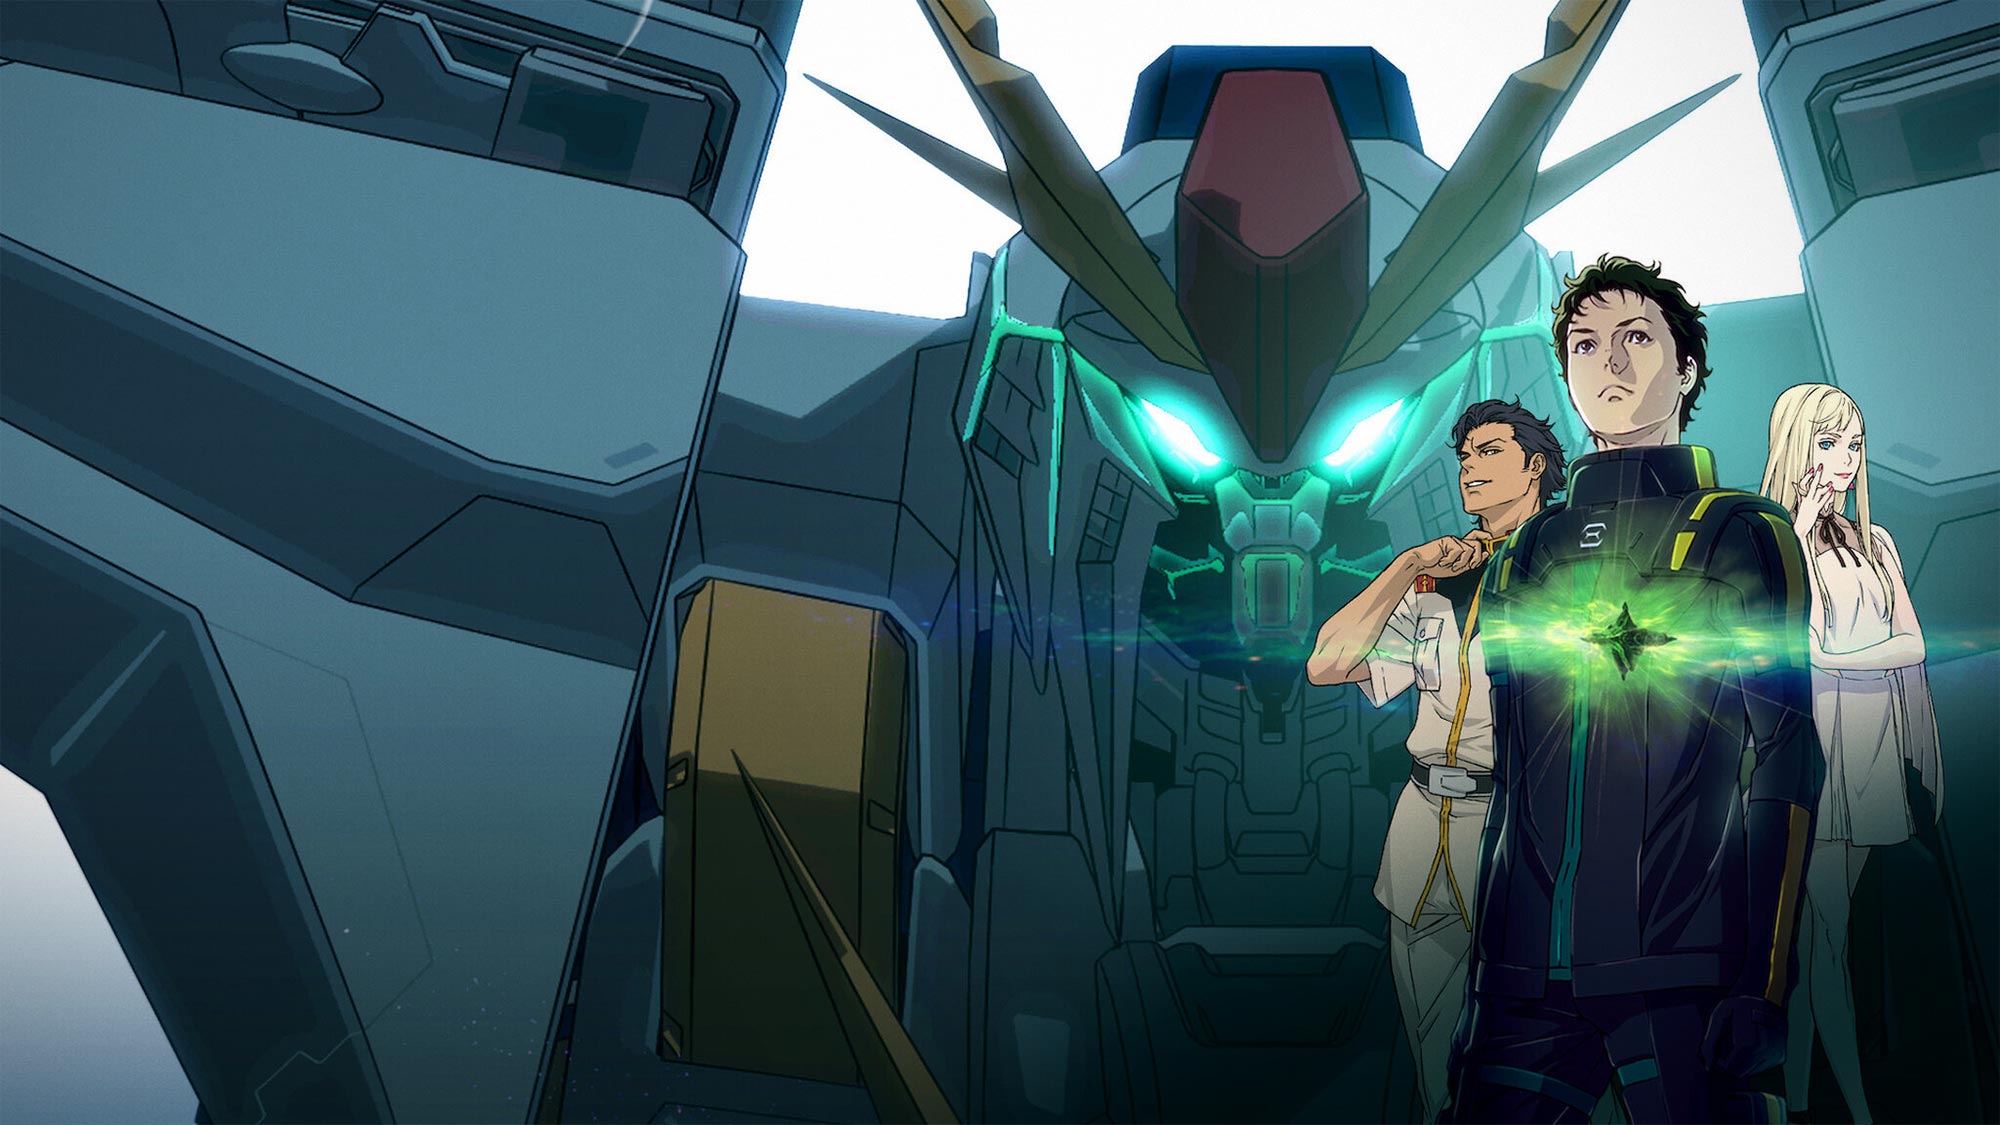 Mobile Suit Gundam Hathaway Ending, Explained: How Does Hathaway Defeat Lane?